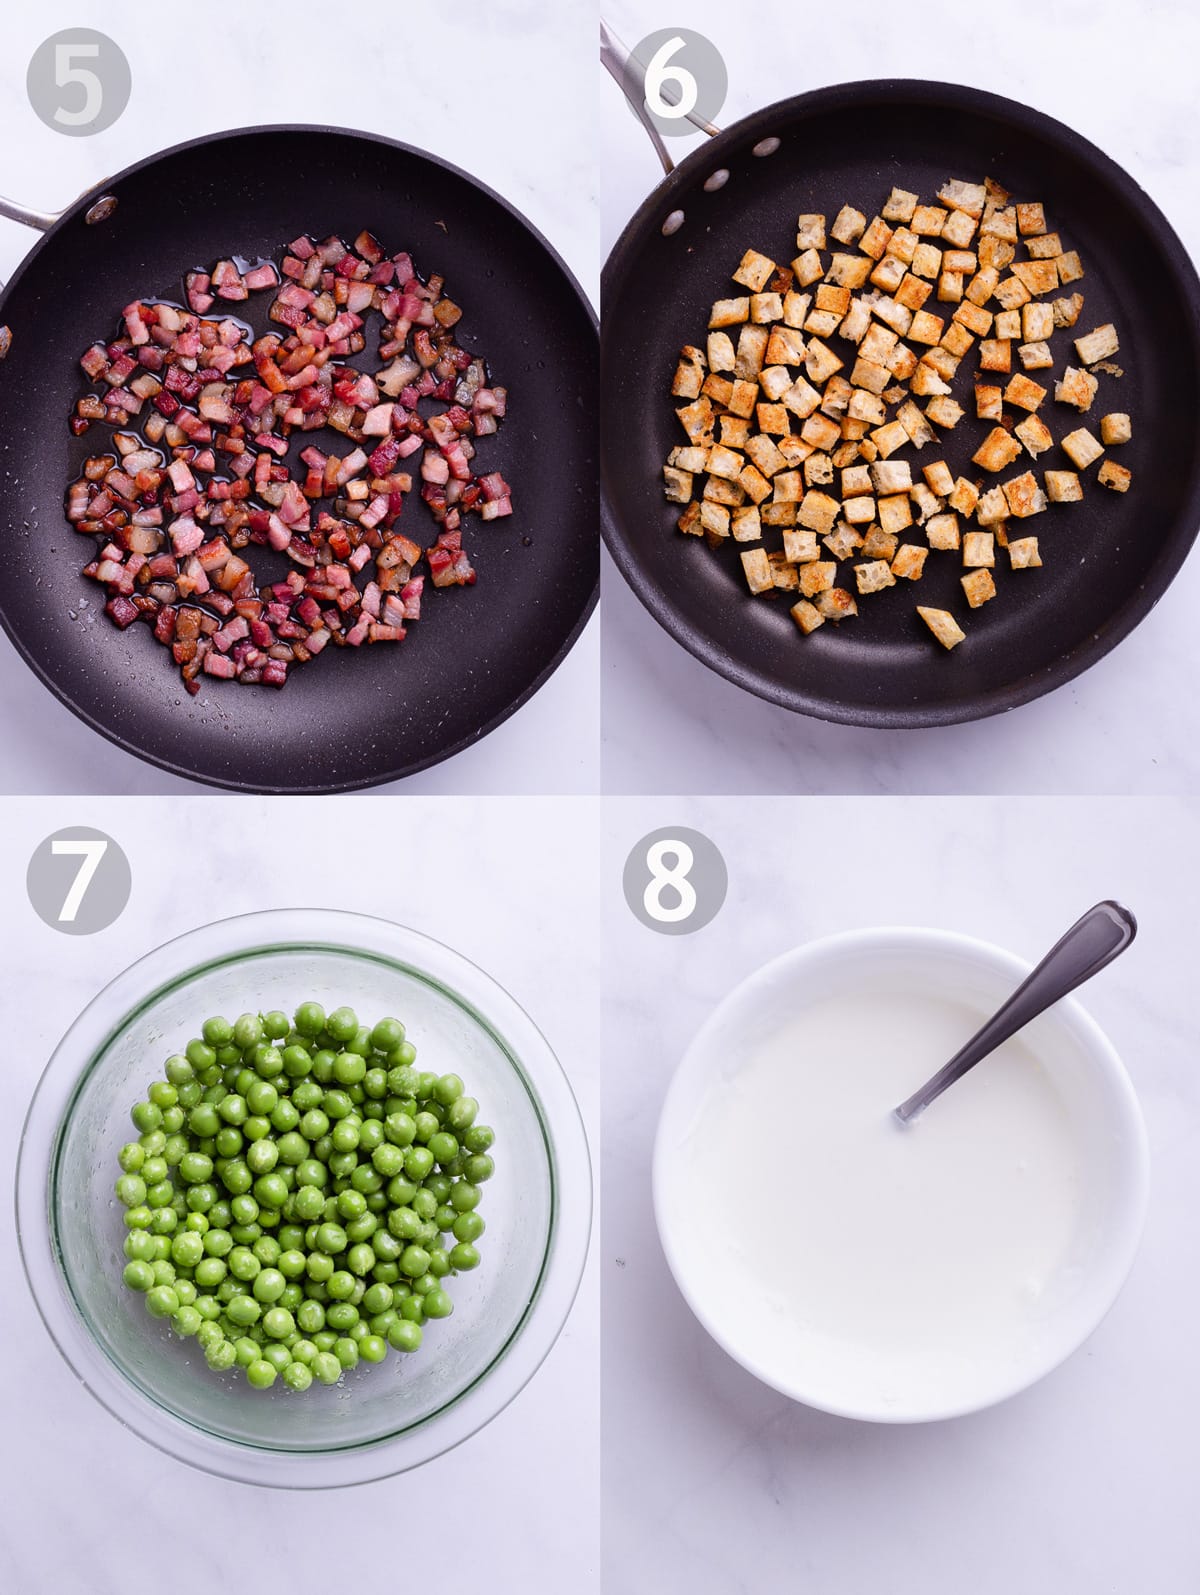 Side-by-side photos of sautéed pancetta, croutons in a pan, a bowl of green peas and a bowl of thinned out yogurt for the toppings.